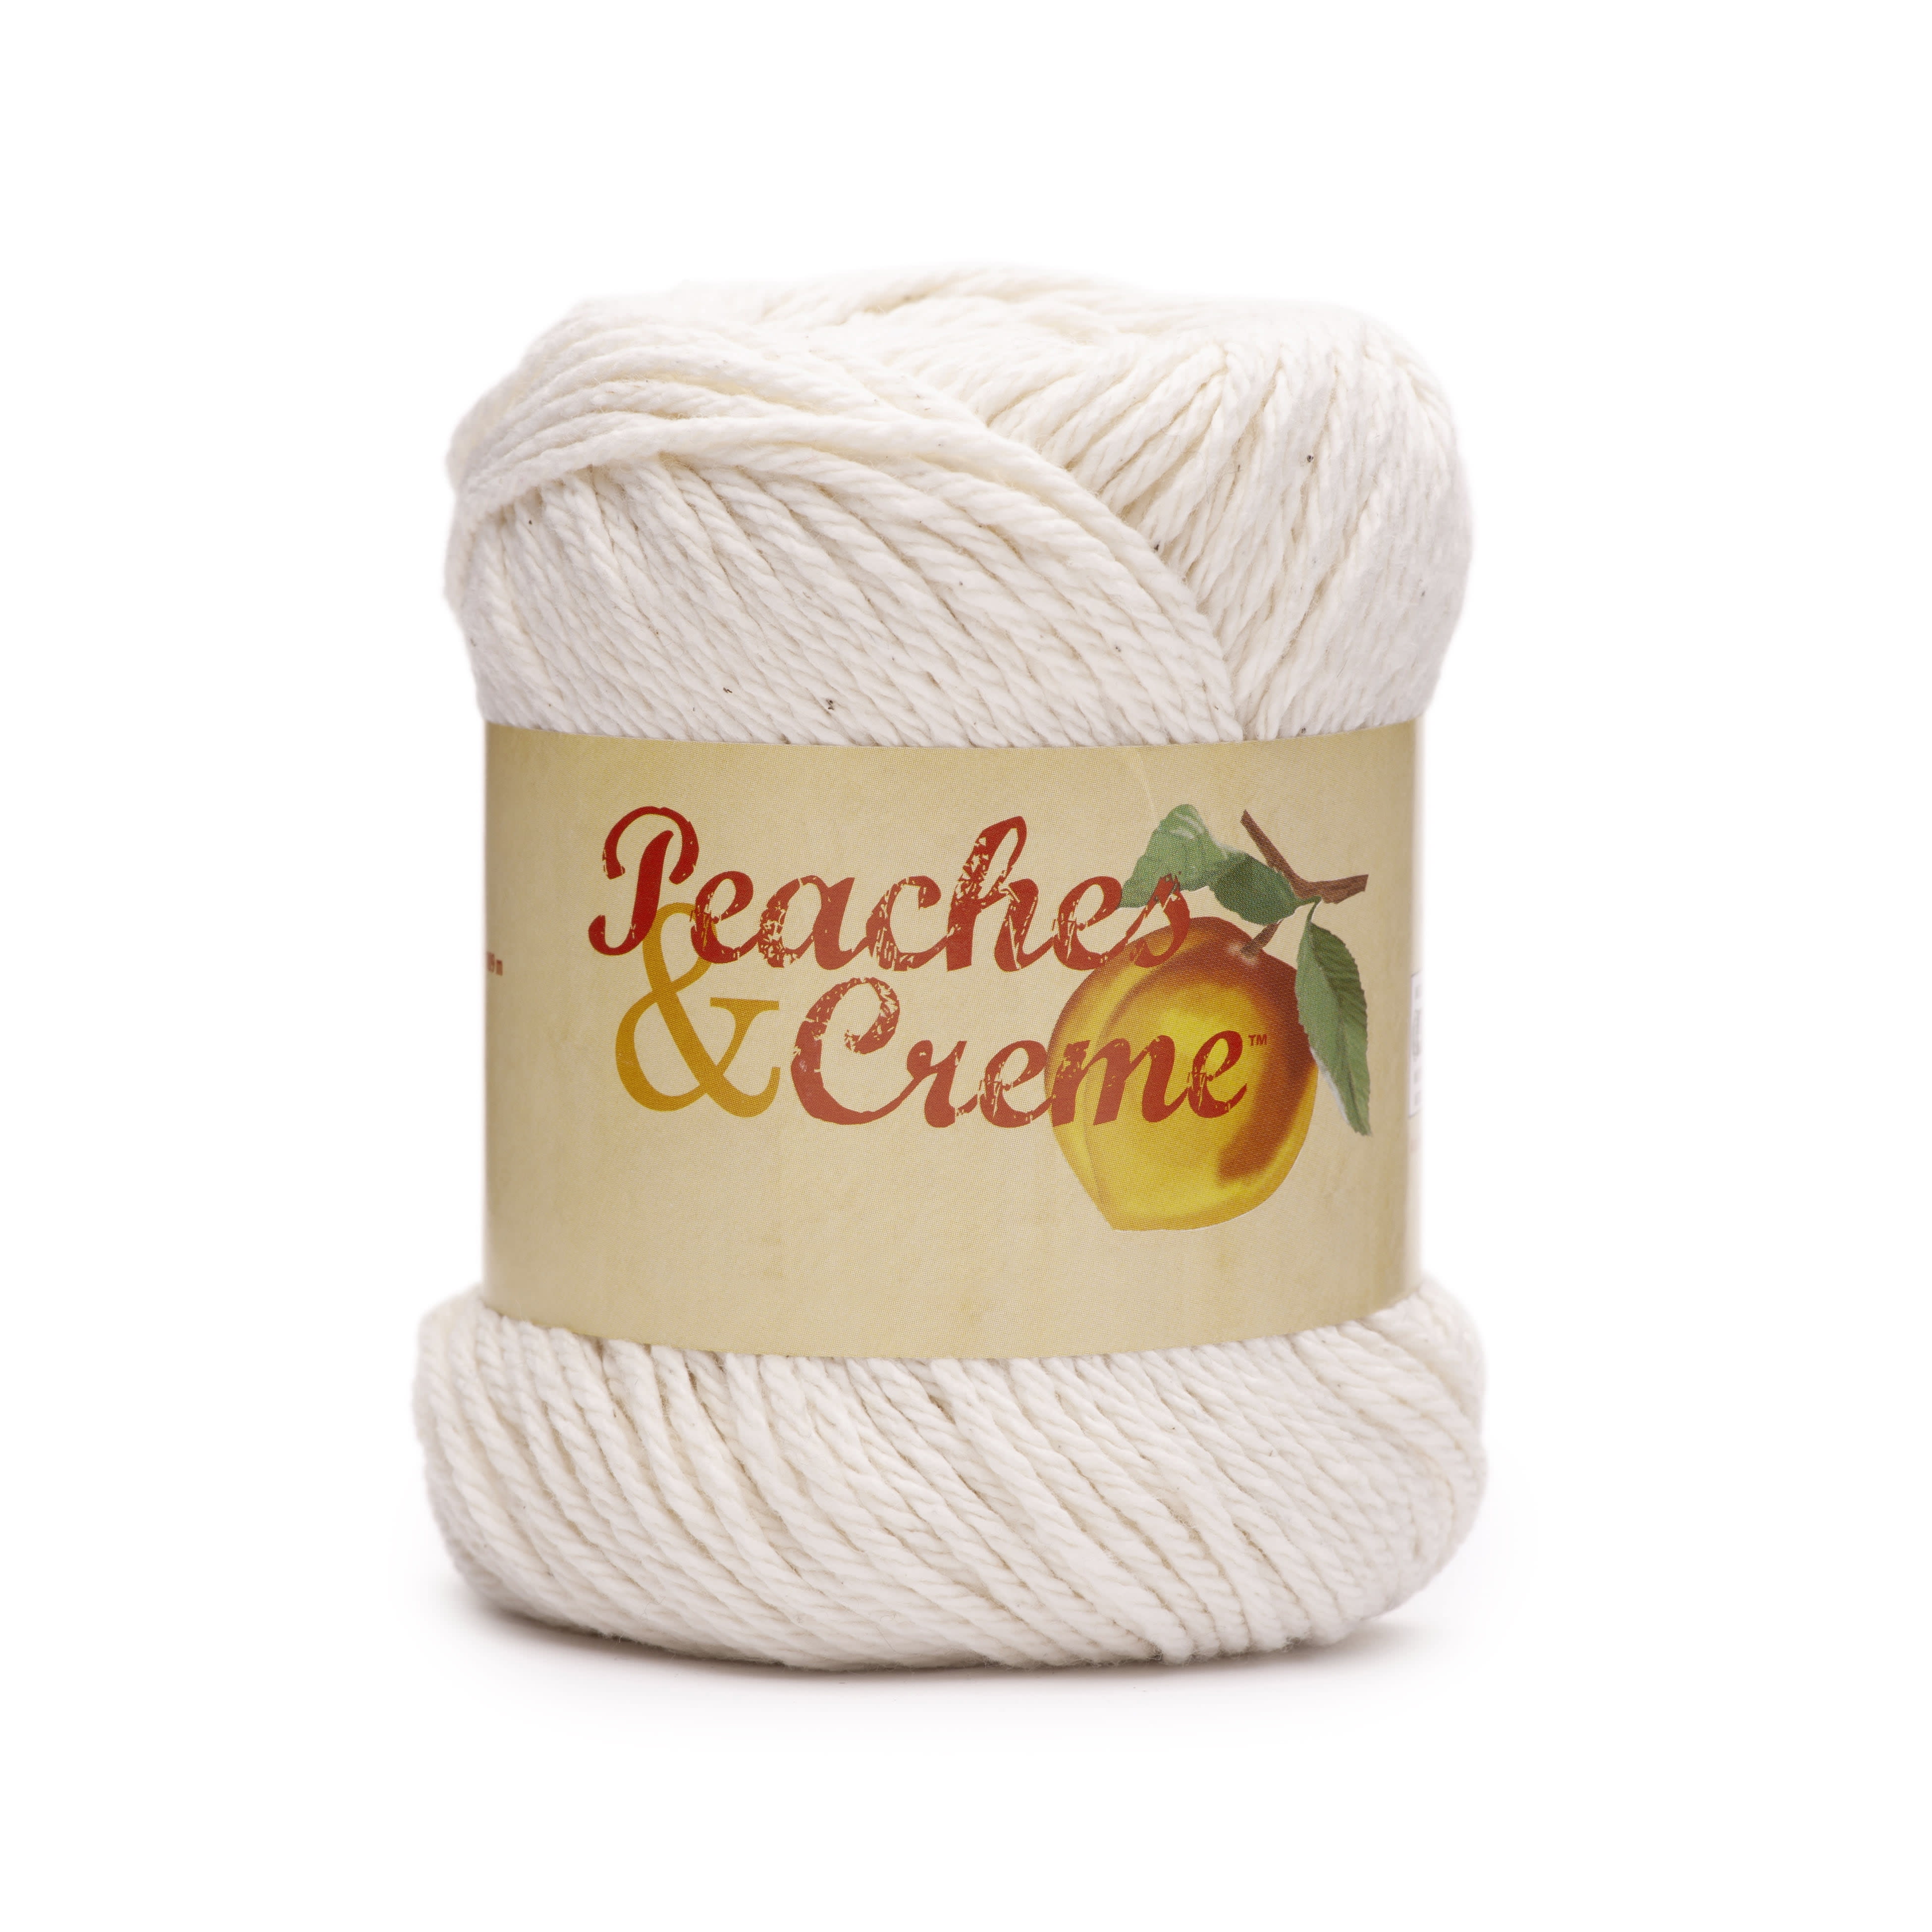 Peaches & Creme Solid 4 Medium Cotton Yarn, White 2.5oz/70.9g, 120 Yards -  DroneUp Delivery